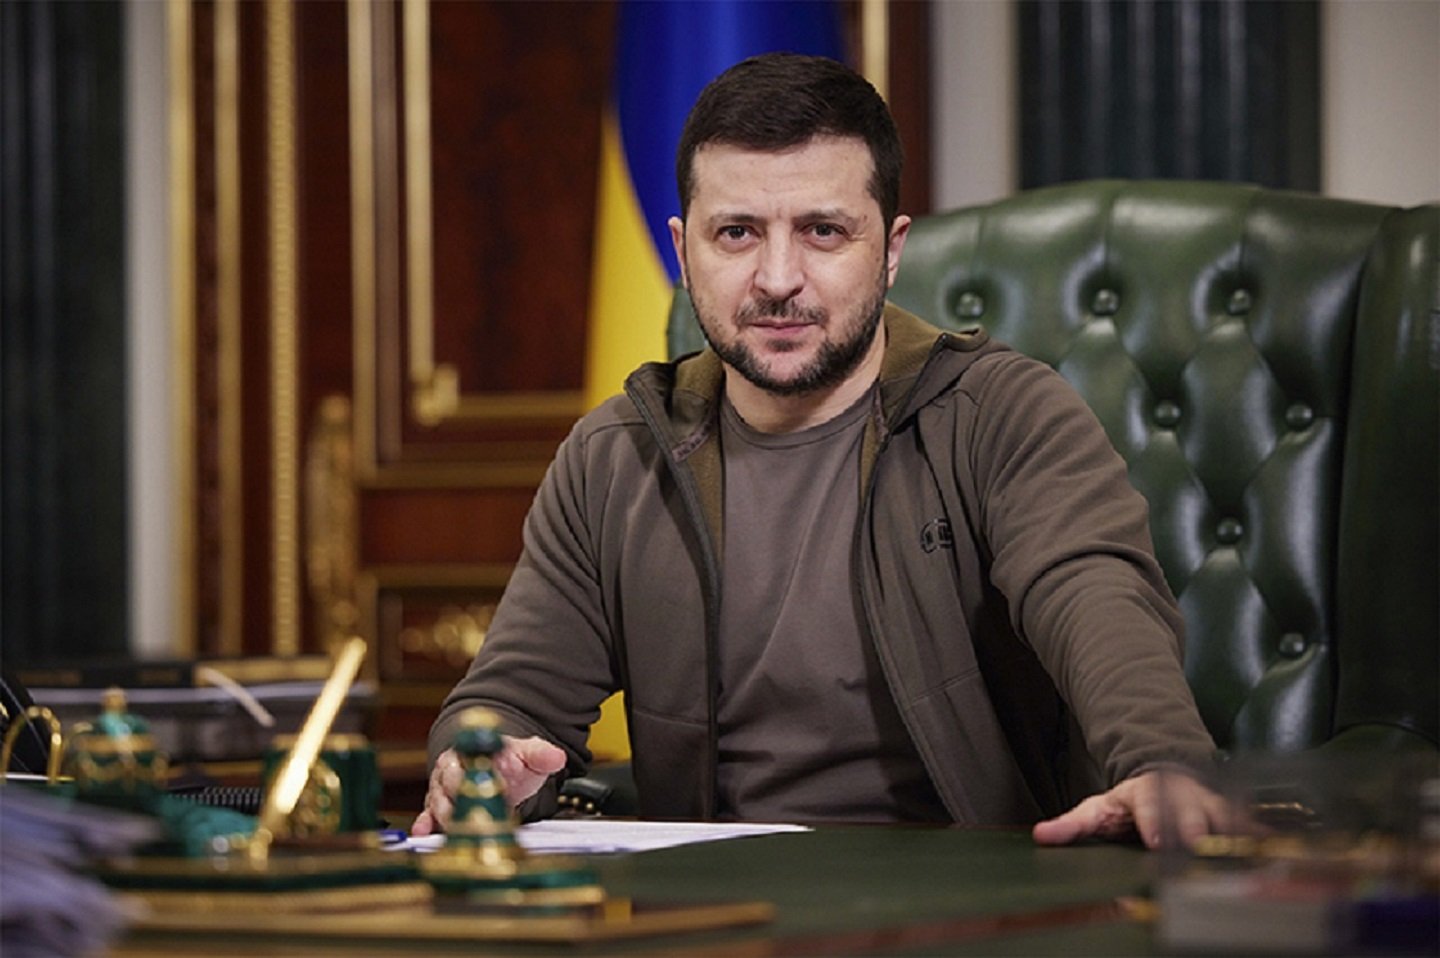 Zelensky Says If He Loses Bakhmut, "Society Will Push Me To Compromise"